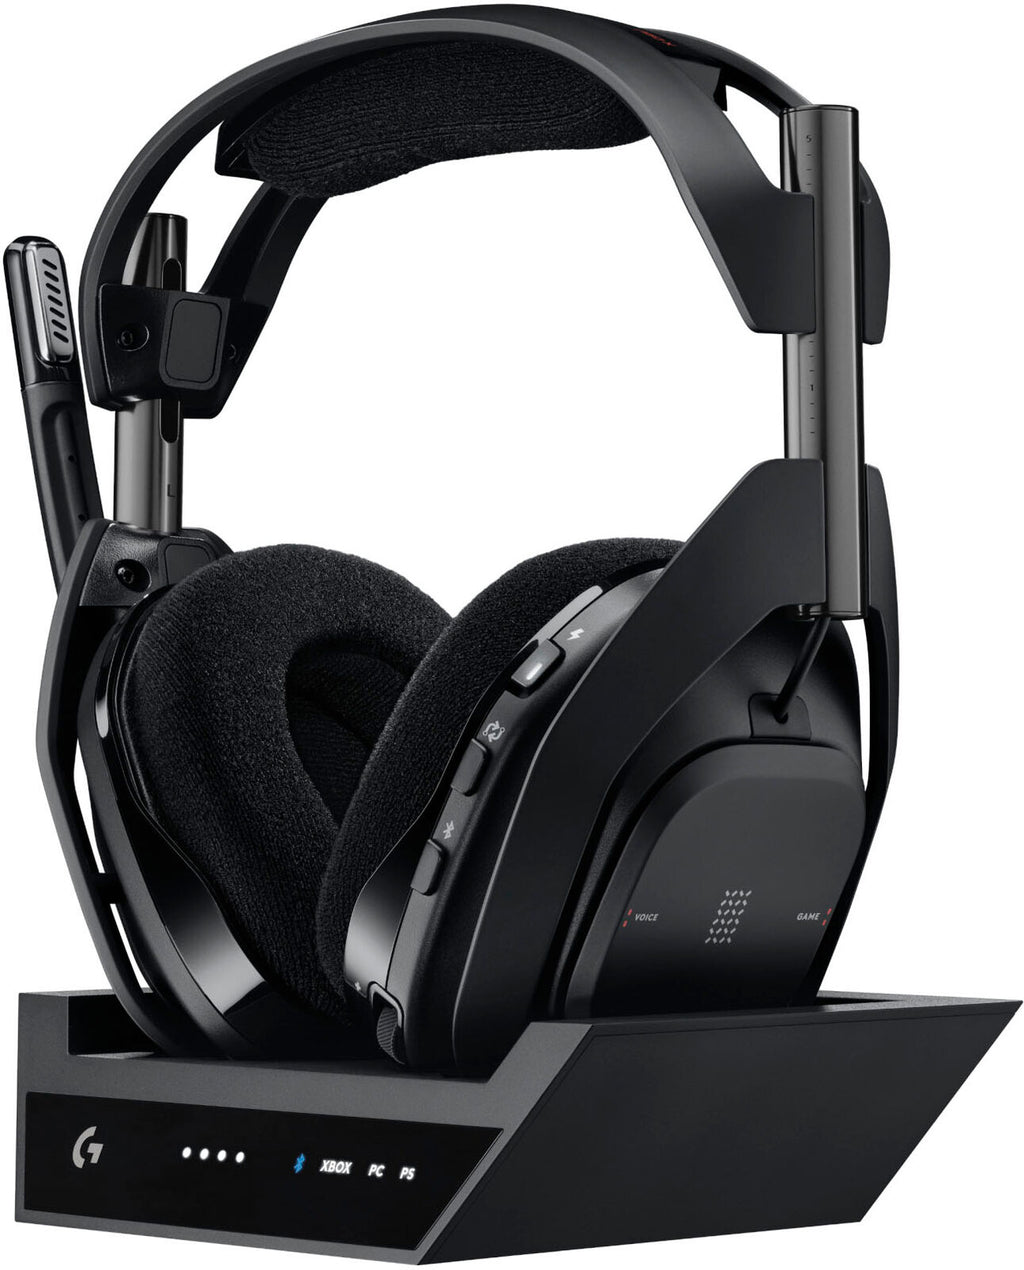 Logitech G ASTRO A50 X LIGHTSPEED Wireless Gaming Headset + Base Station (BLACK) Frequency Response 60-20,000 Hz 2-Year Limited Hardware Warranty-0